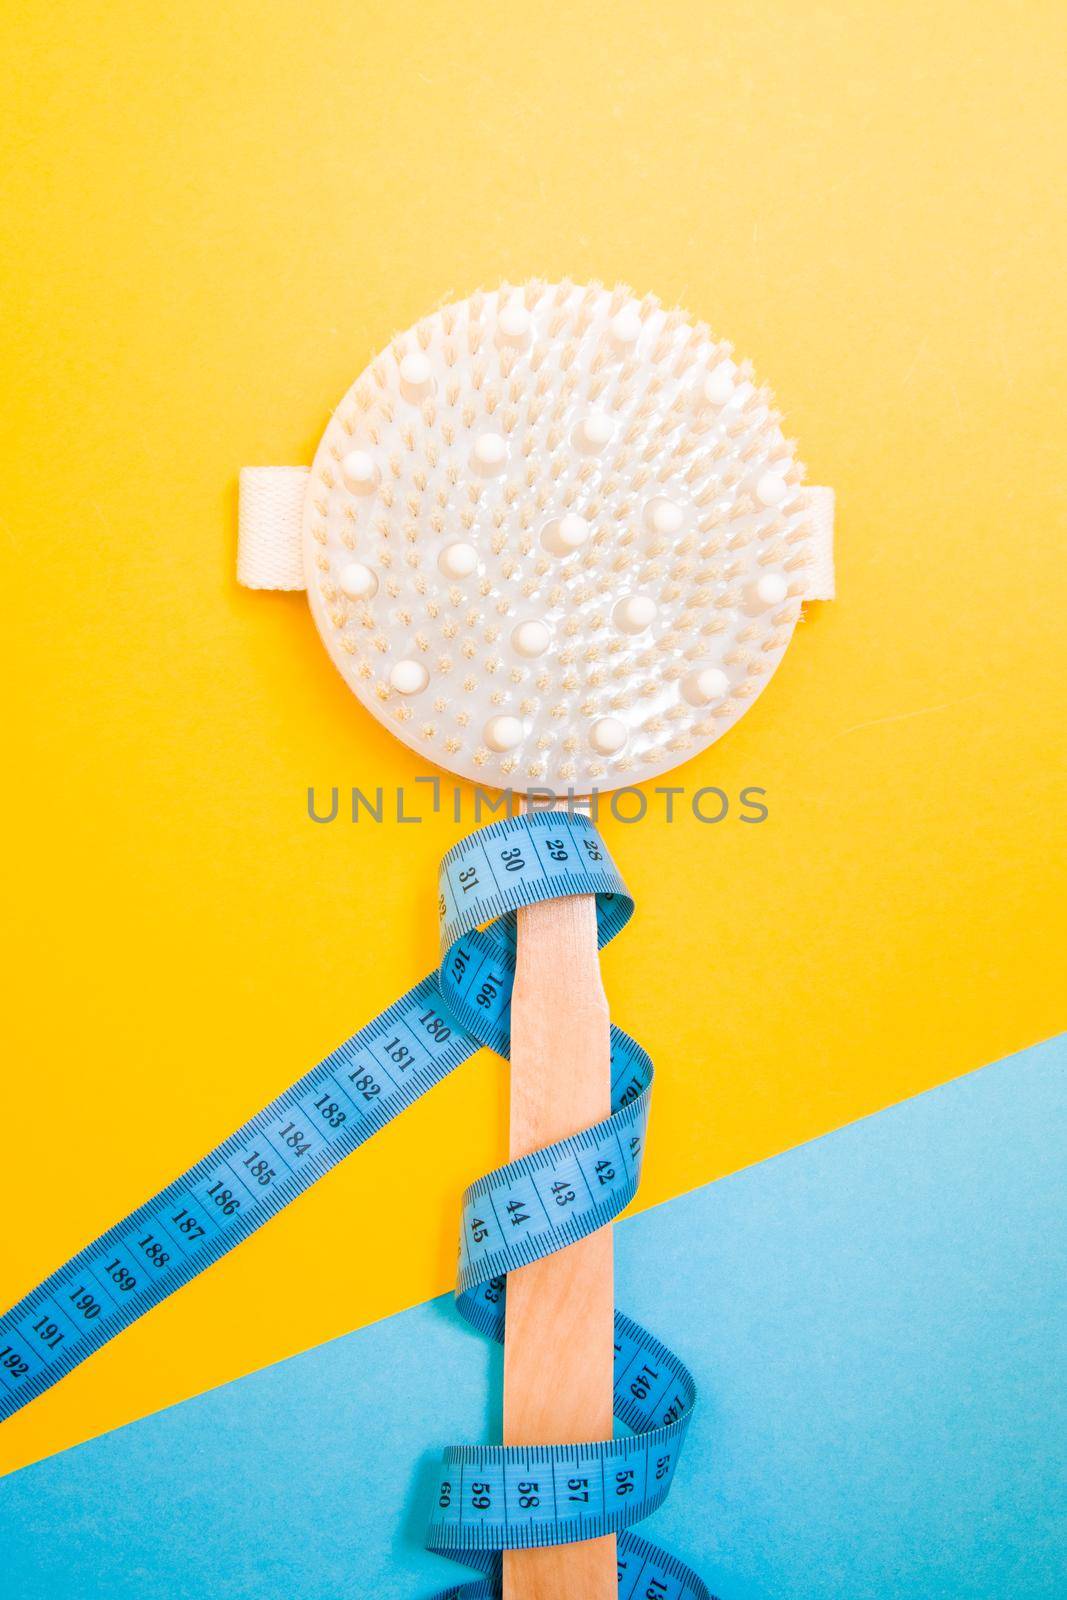 wooden brush for dry body massage on a blue and yellow background, measuring tape wrapped around the brush handle, copy space, peeling and body care at home